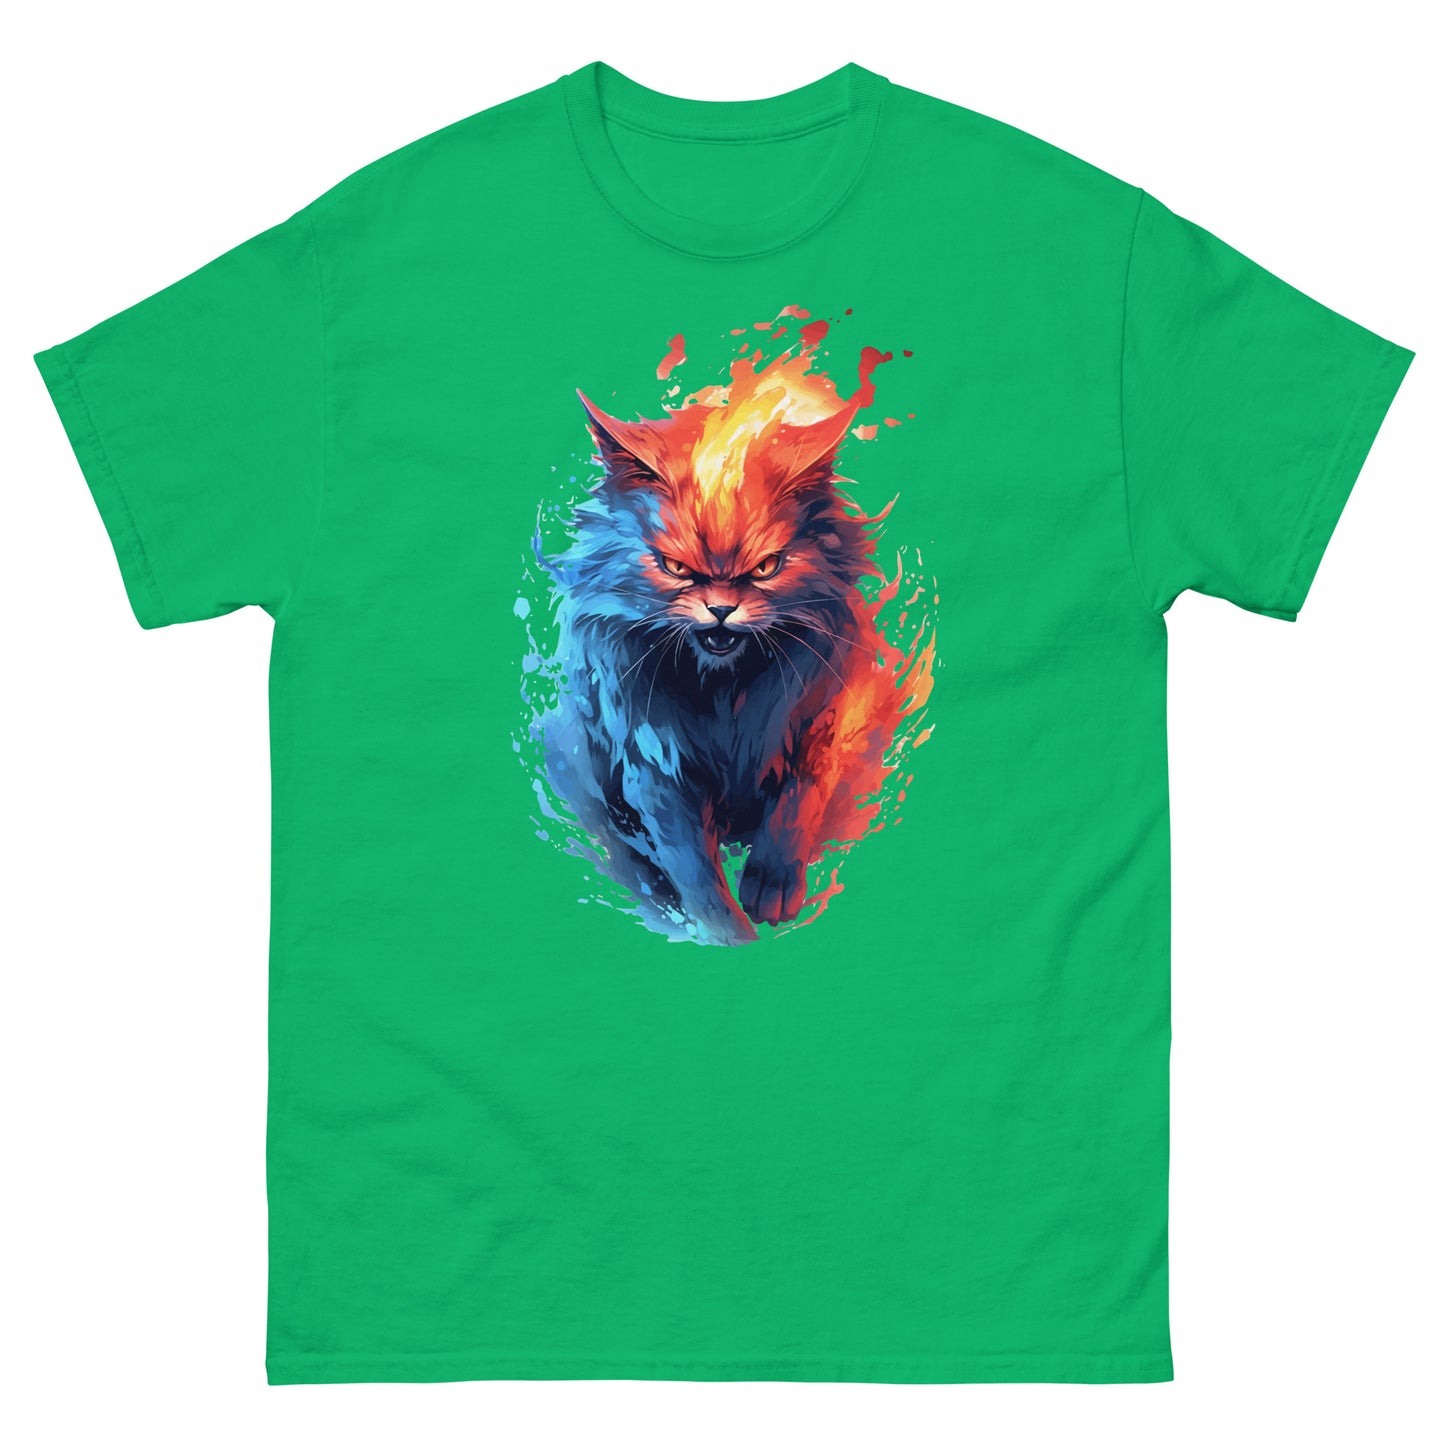 Cat on fire, Angry wild cat with red eyes, Fluffy predator in red and blue flames, Soft hot paws and whiskers and claws - Men's classic tee